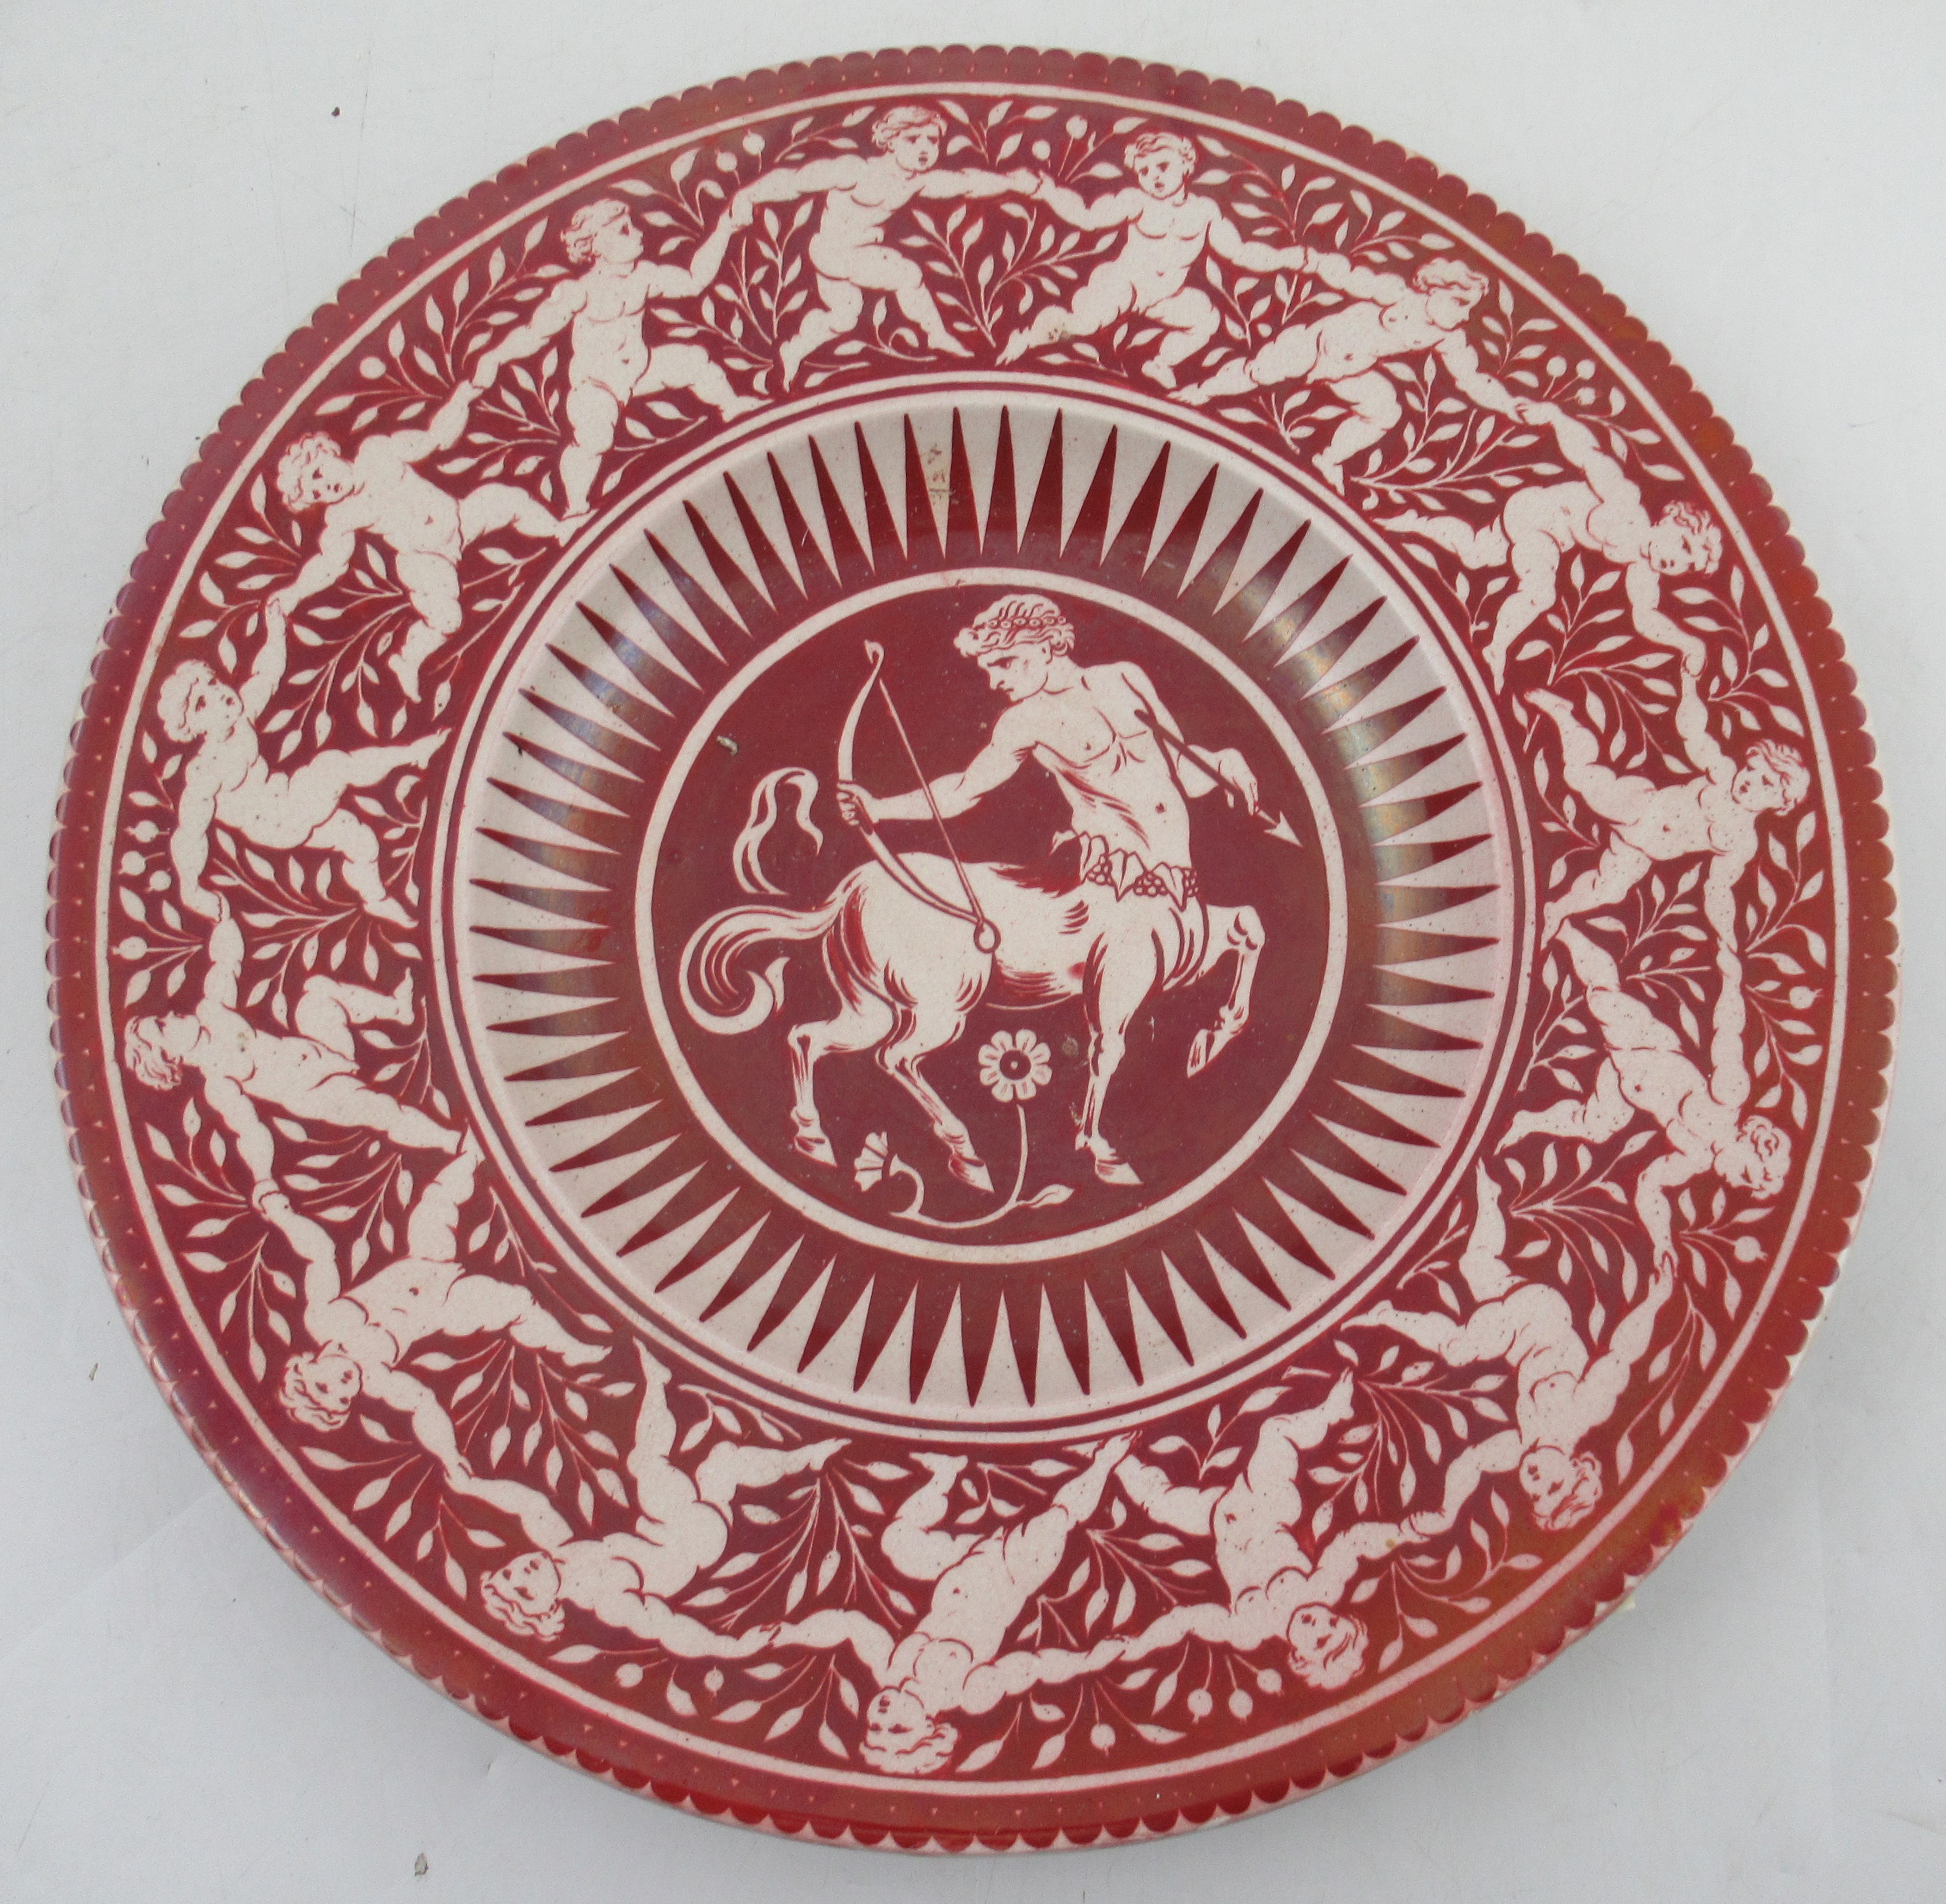 A 19th century William De Morgan ruby lustre circular charger, decorated to the centre with a